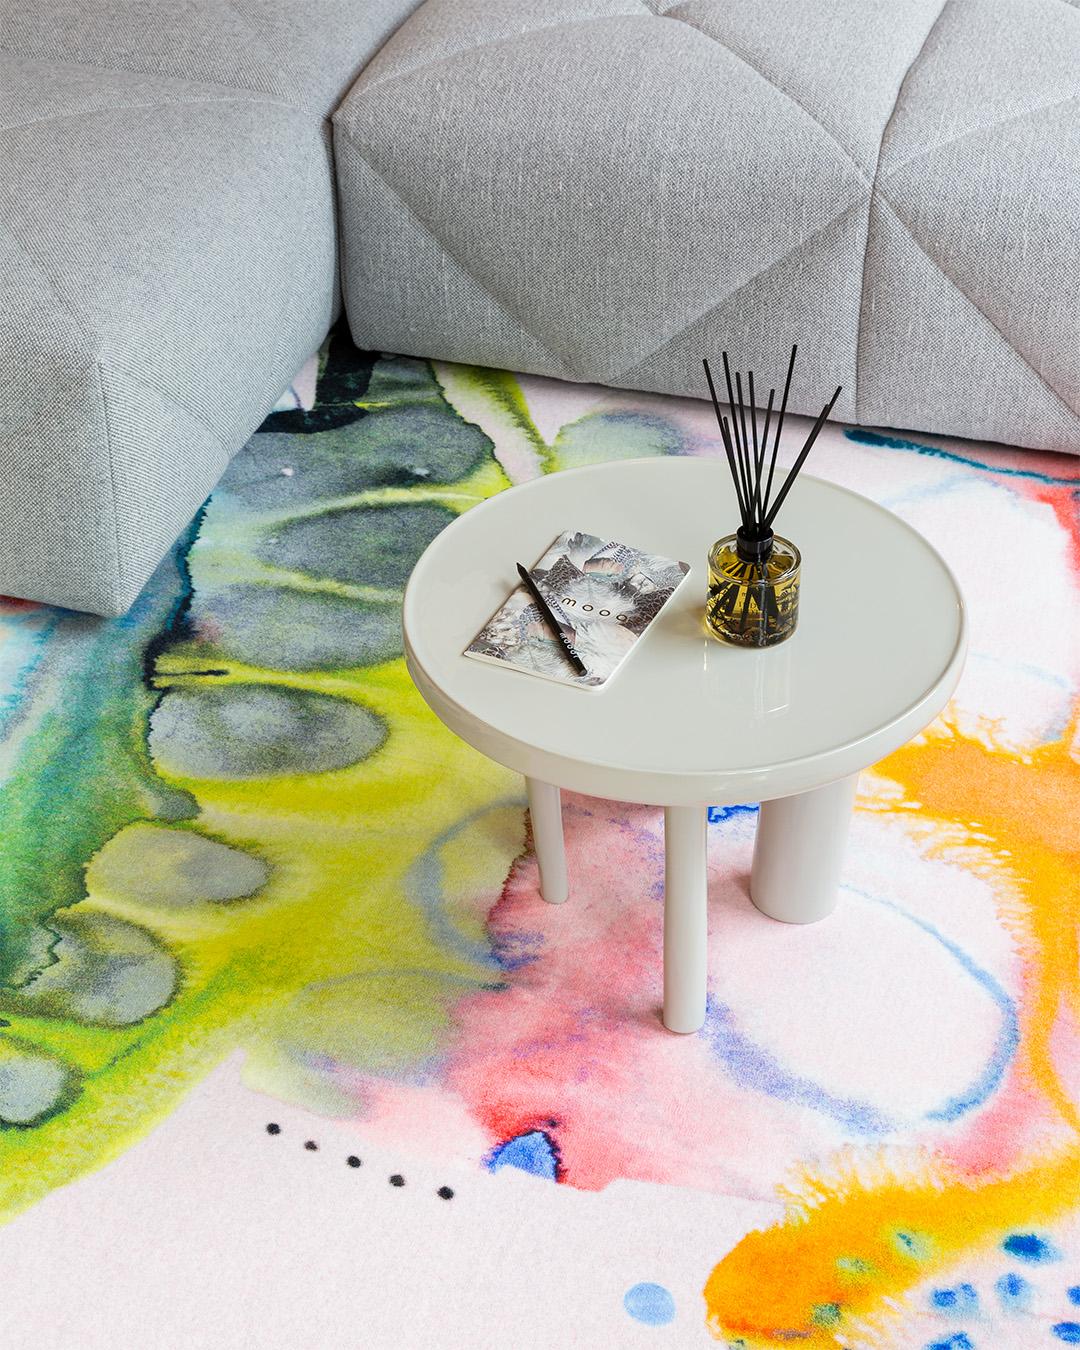 Moooi small wasp II rug in low pile polyamide by Emma Larsson.

Emma Larsson is a Stockholm-based artist and illustrator. Her work strikes the balance between colourful dreamscape and inarticulable melancholy. Emma has evolved her practice to